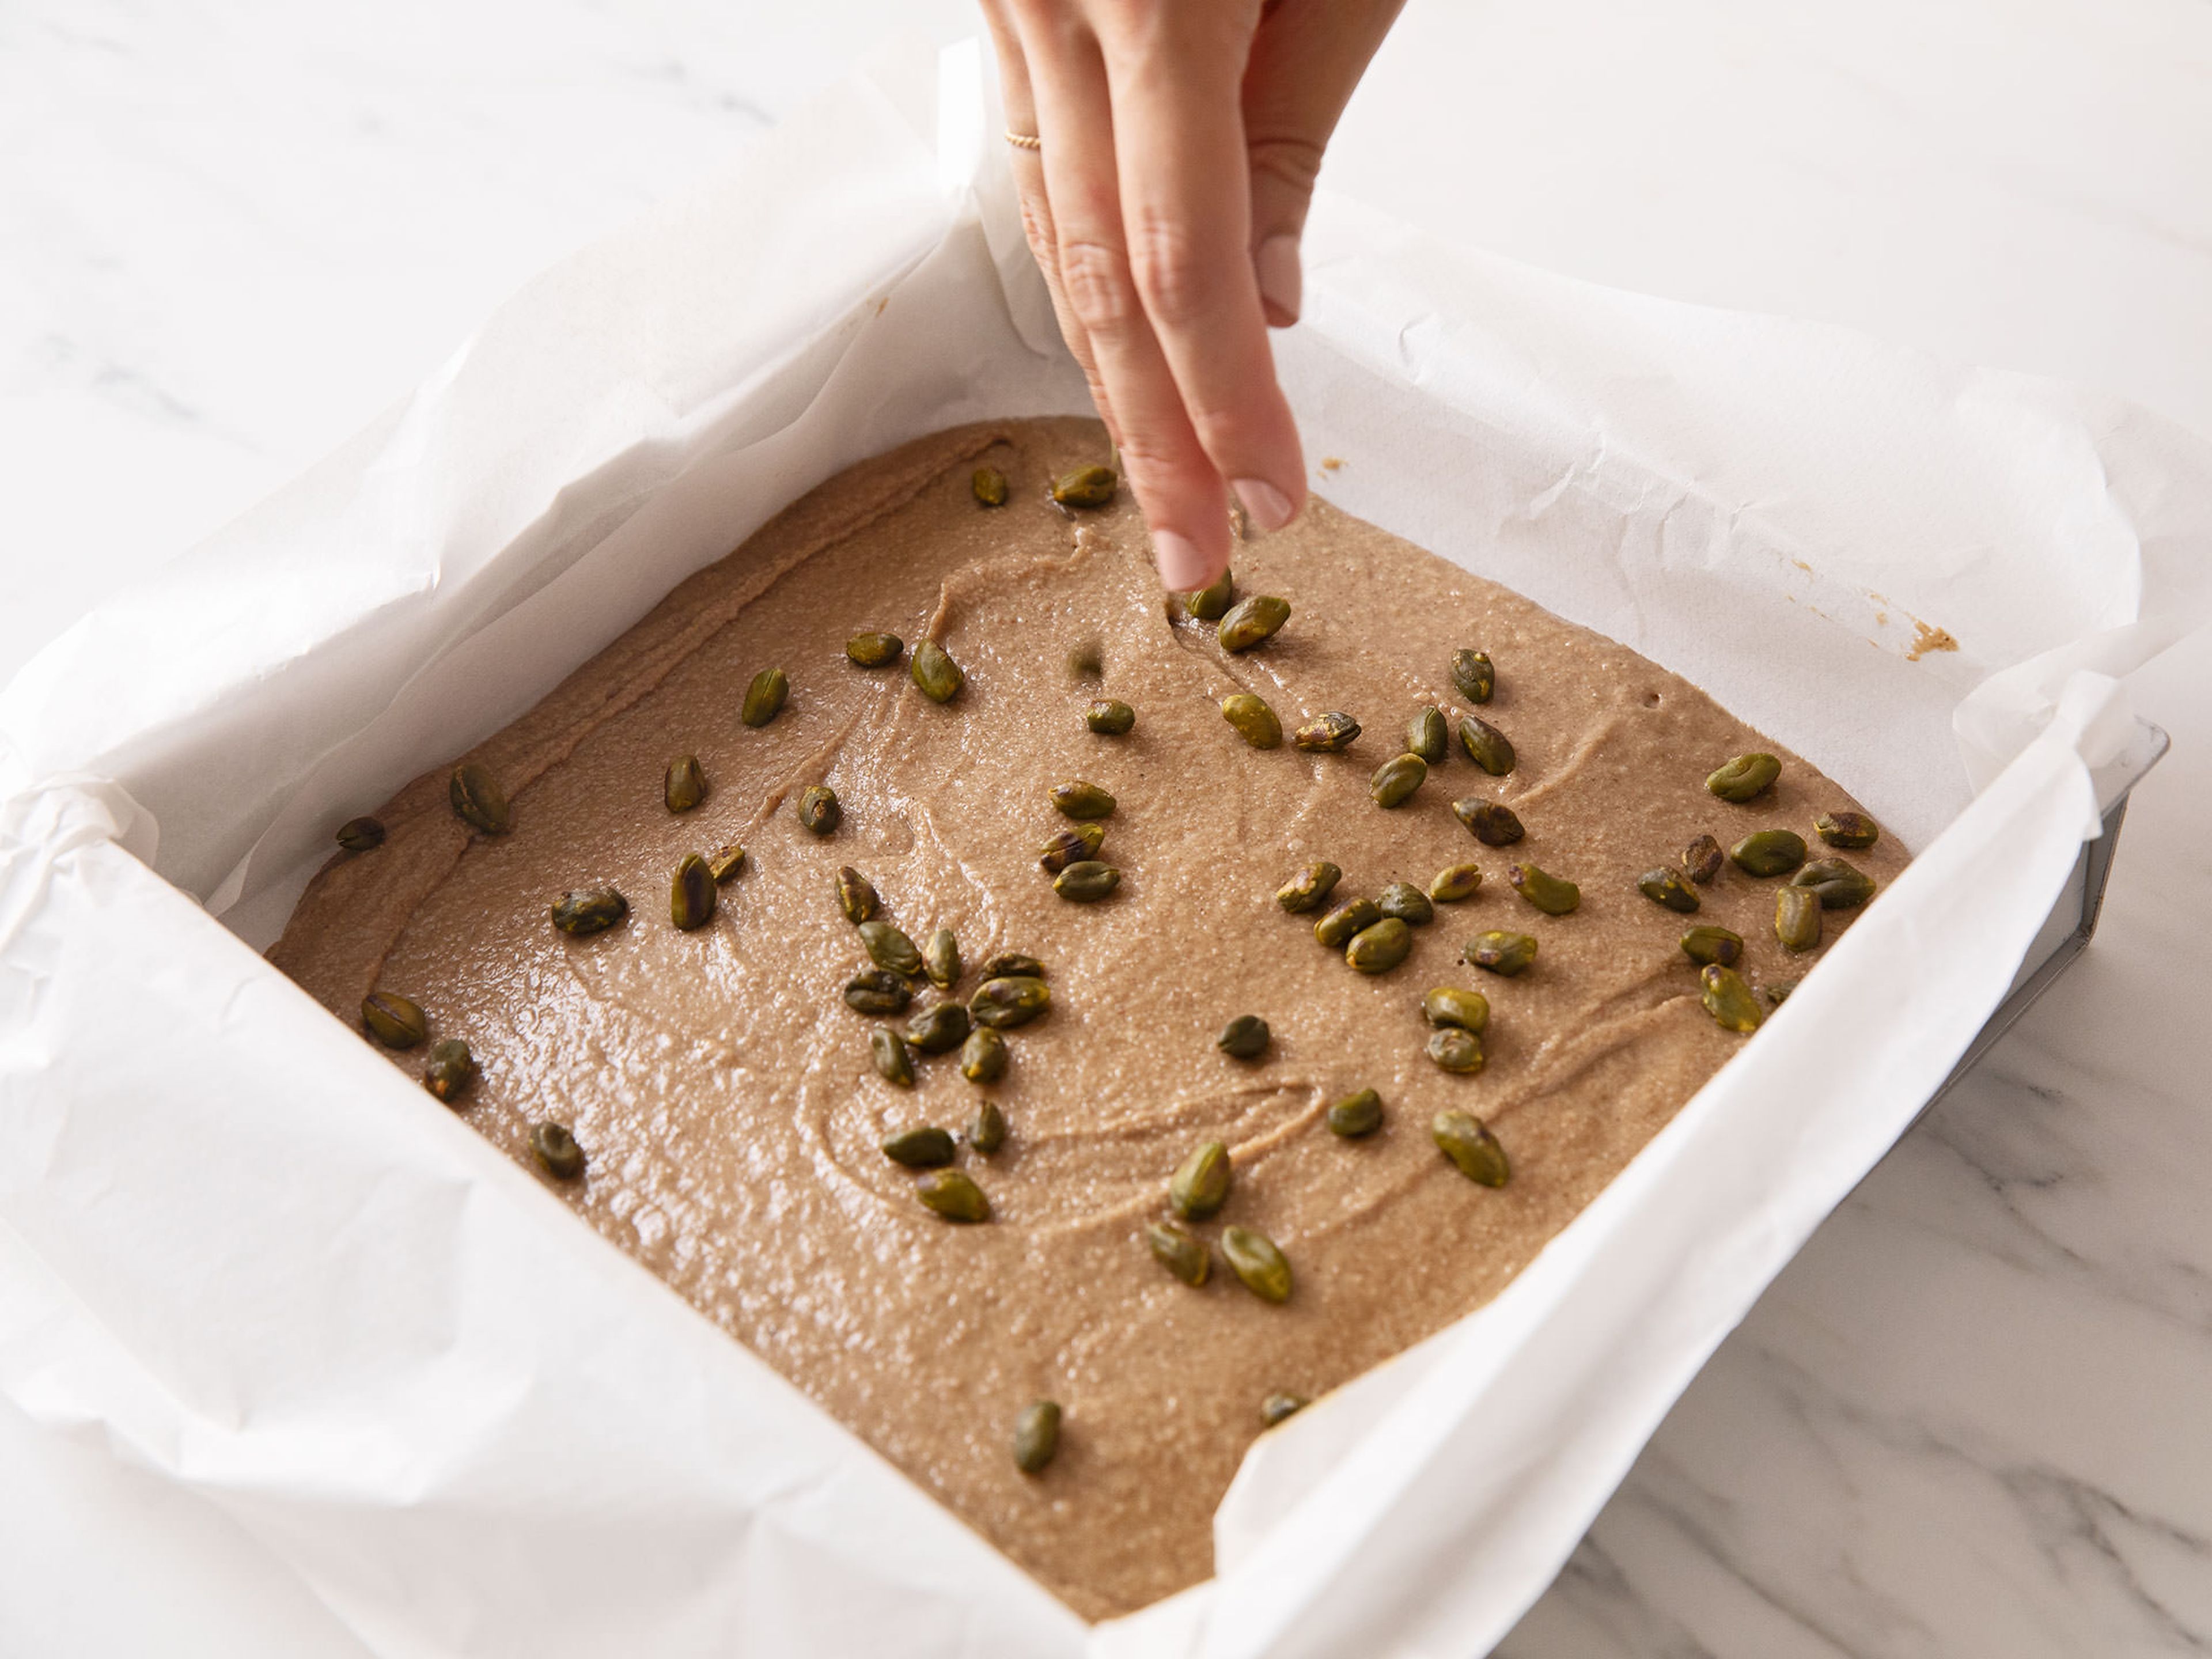 Transfer mixture immediately into a parchment paper-lined baking pan. Cover with toasted pistachios and let cool completely, approx 2 hrs. Cut into squares. Enjoy!